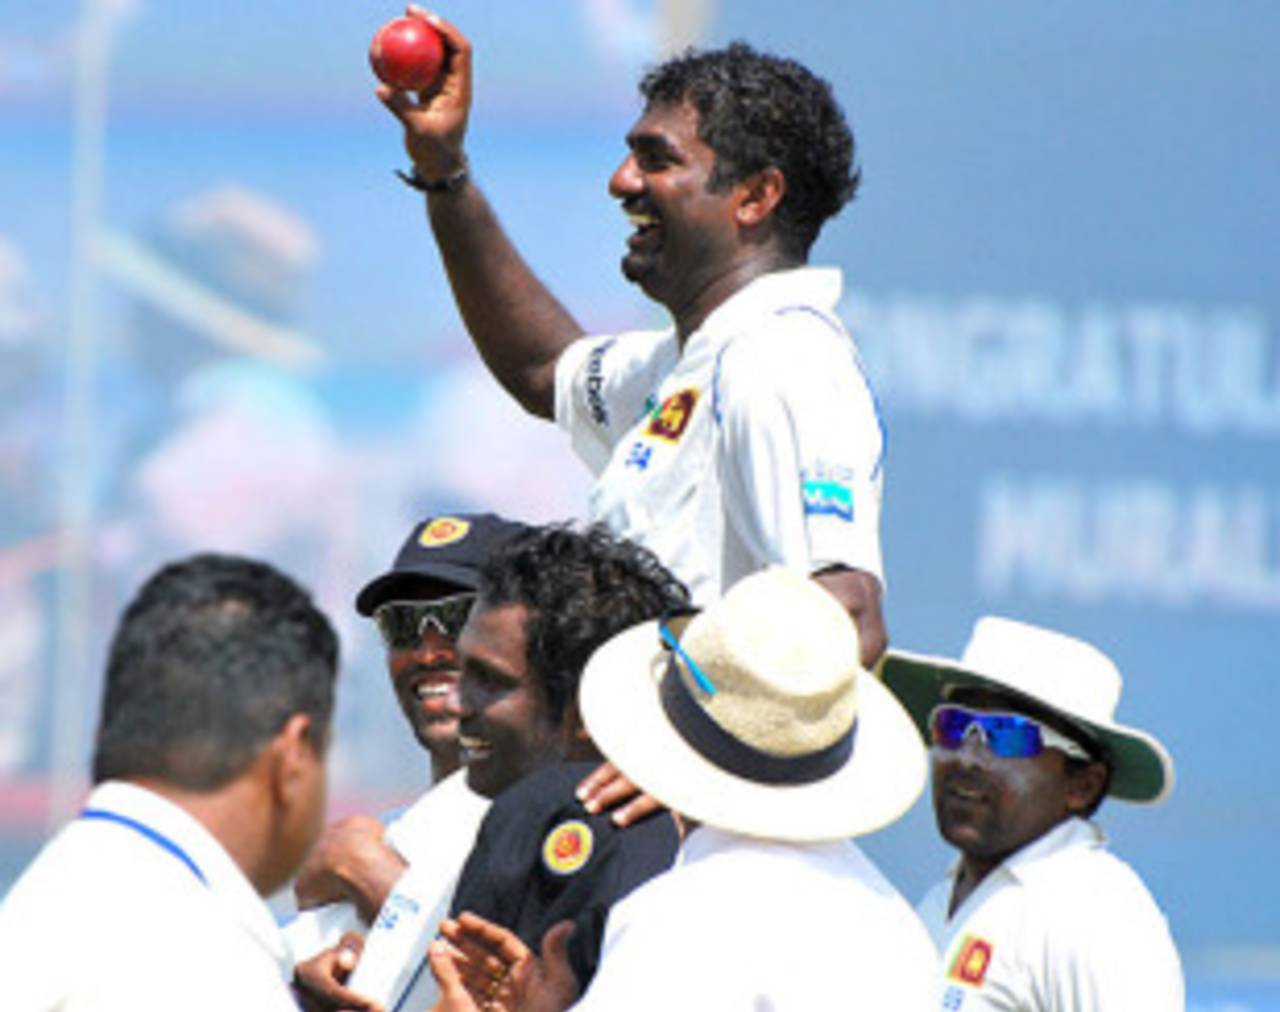 Muttiah Muralitharan's team-mates lift him on their shoulders as he leaves the field, Sri Lanka v India, 1st Test, Galle, 5th day, July 22, 2010